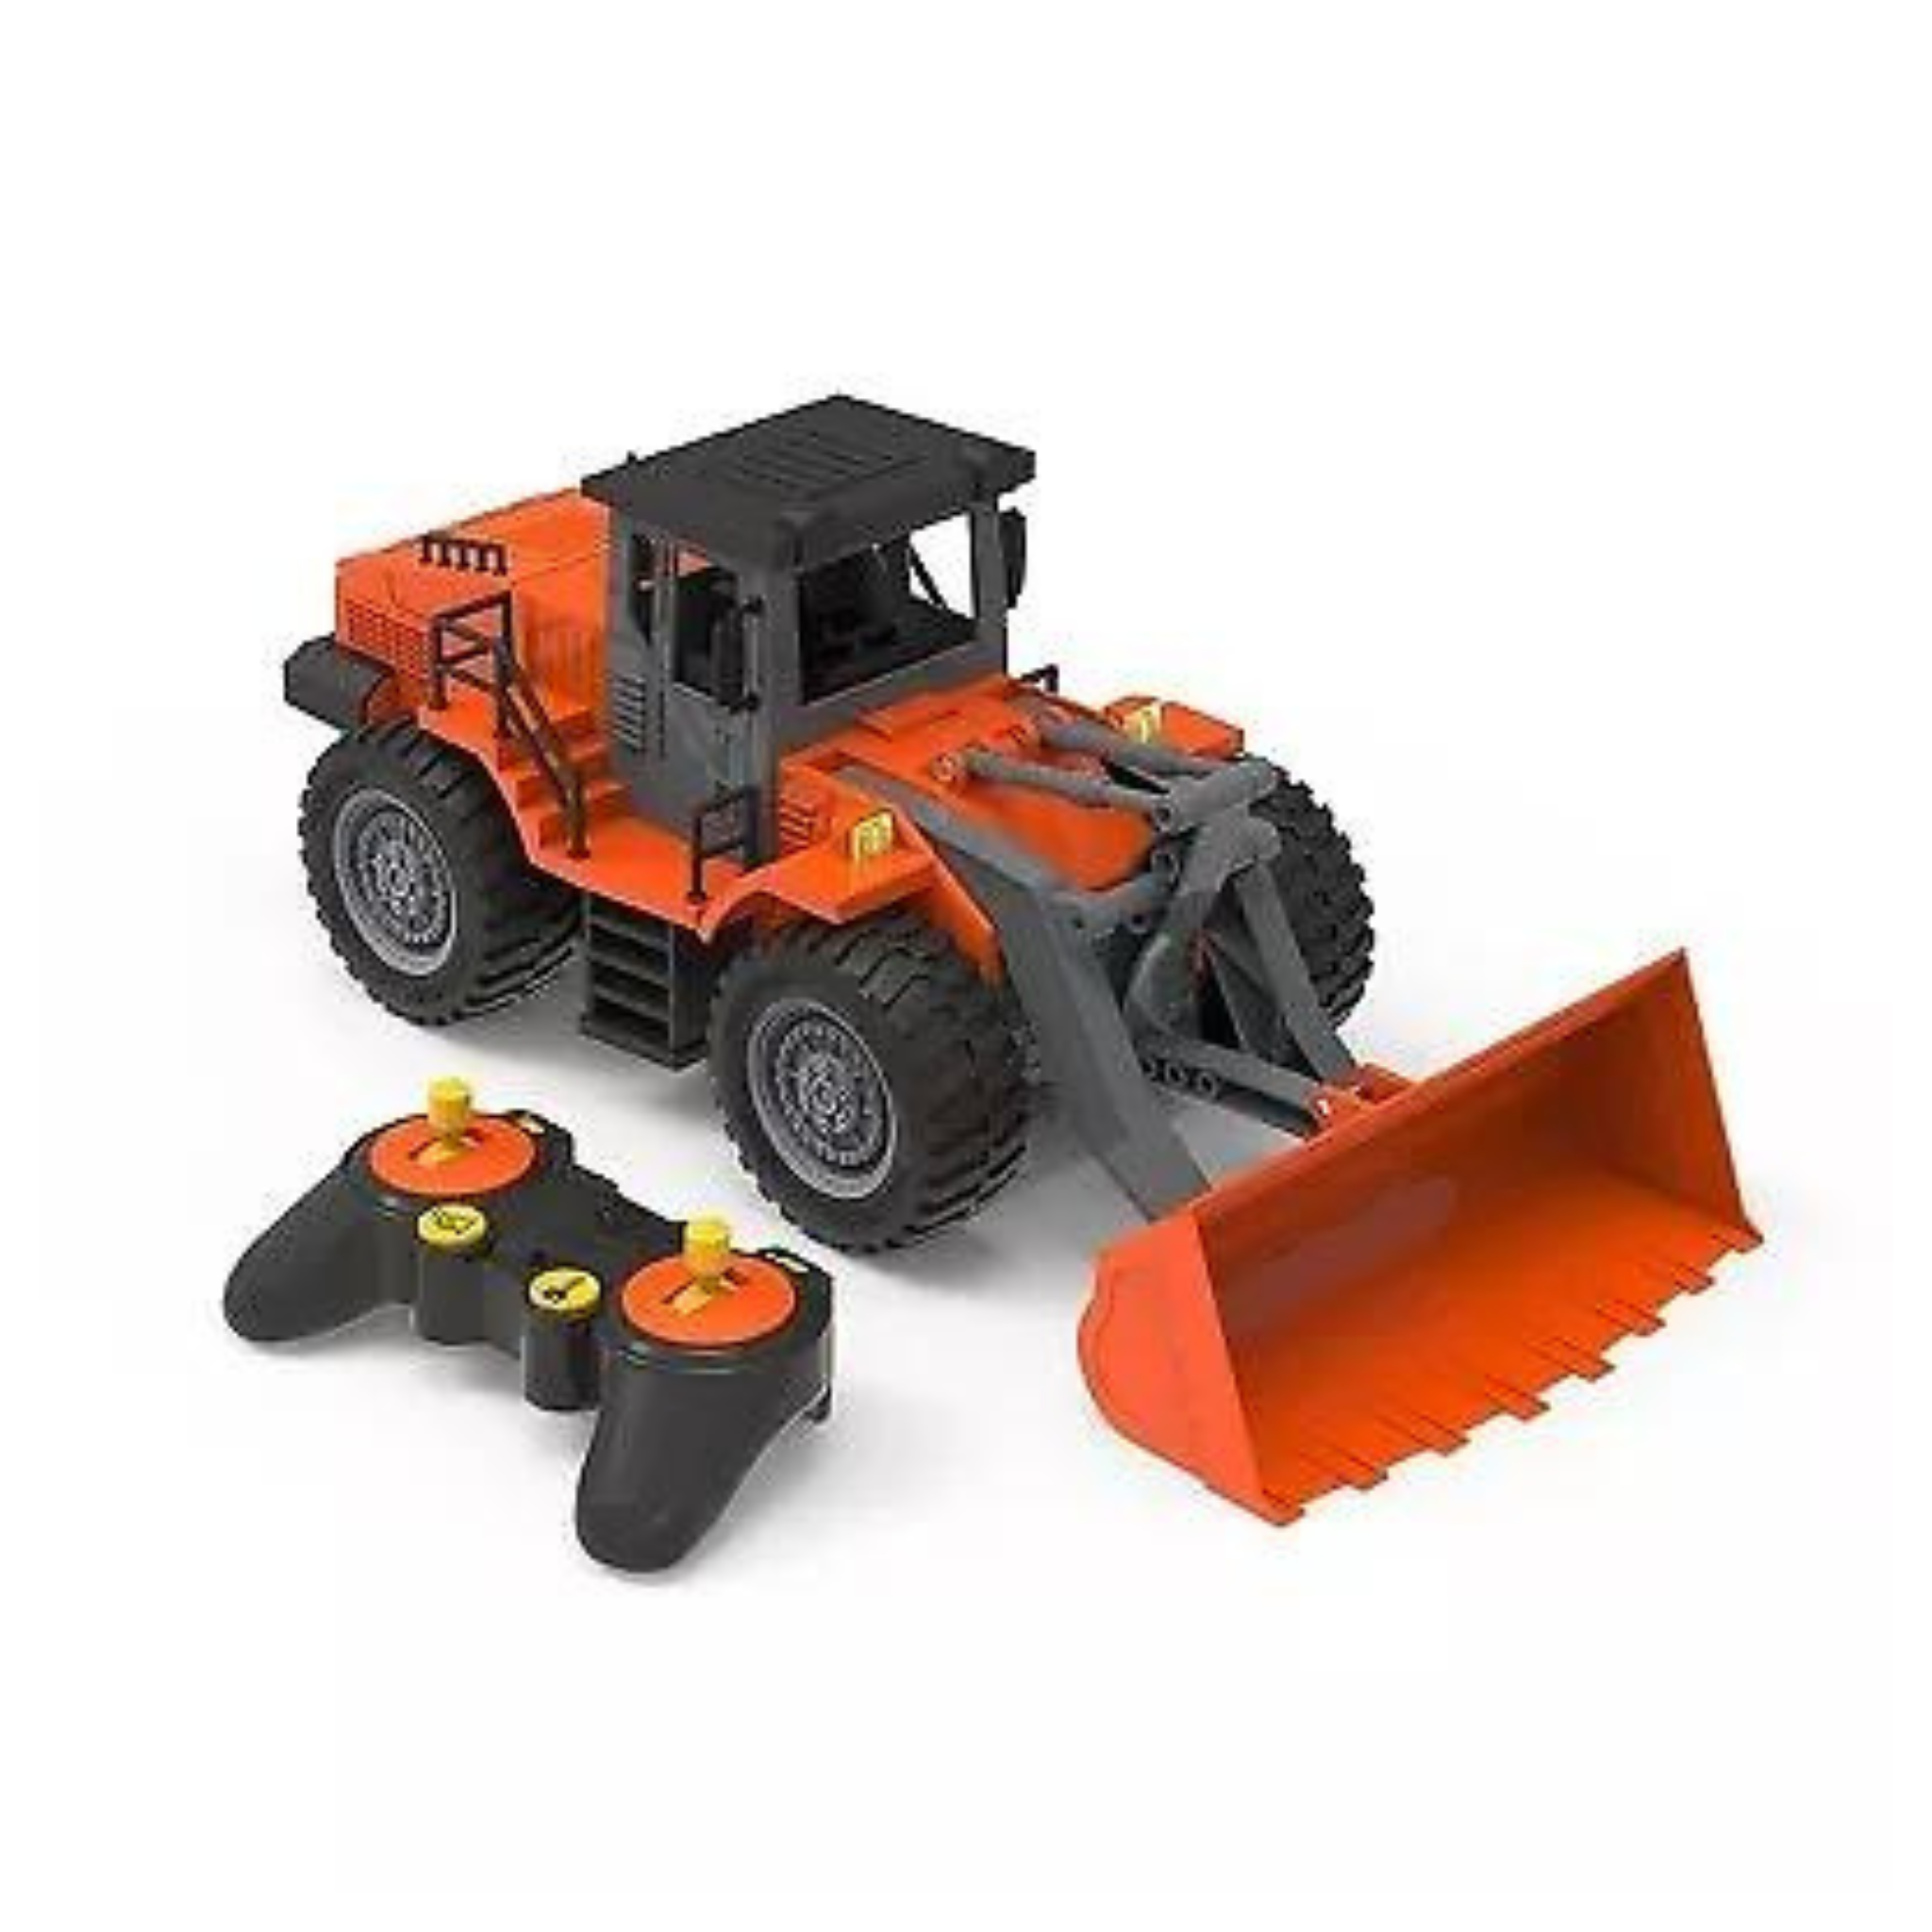 Driven Medium Toy Construction Truck with Remote Control